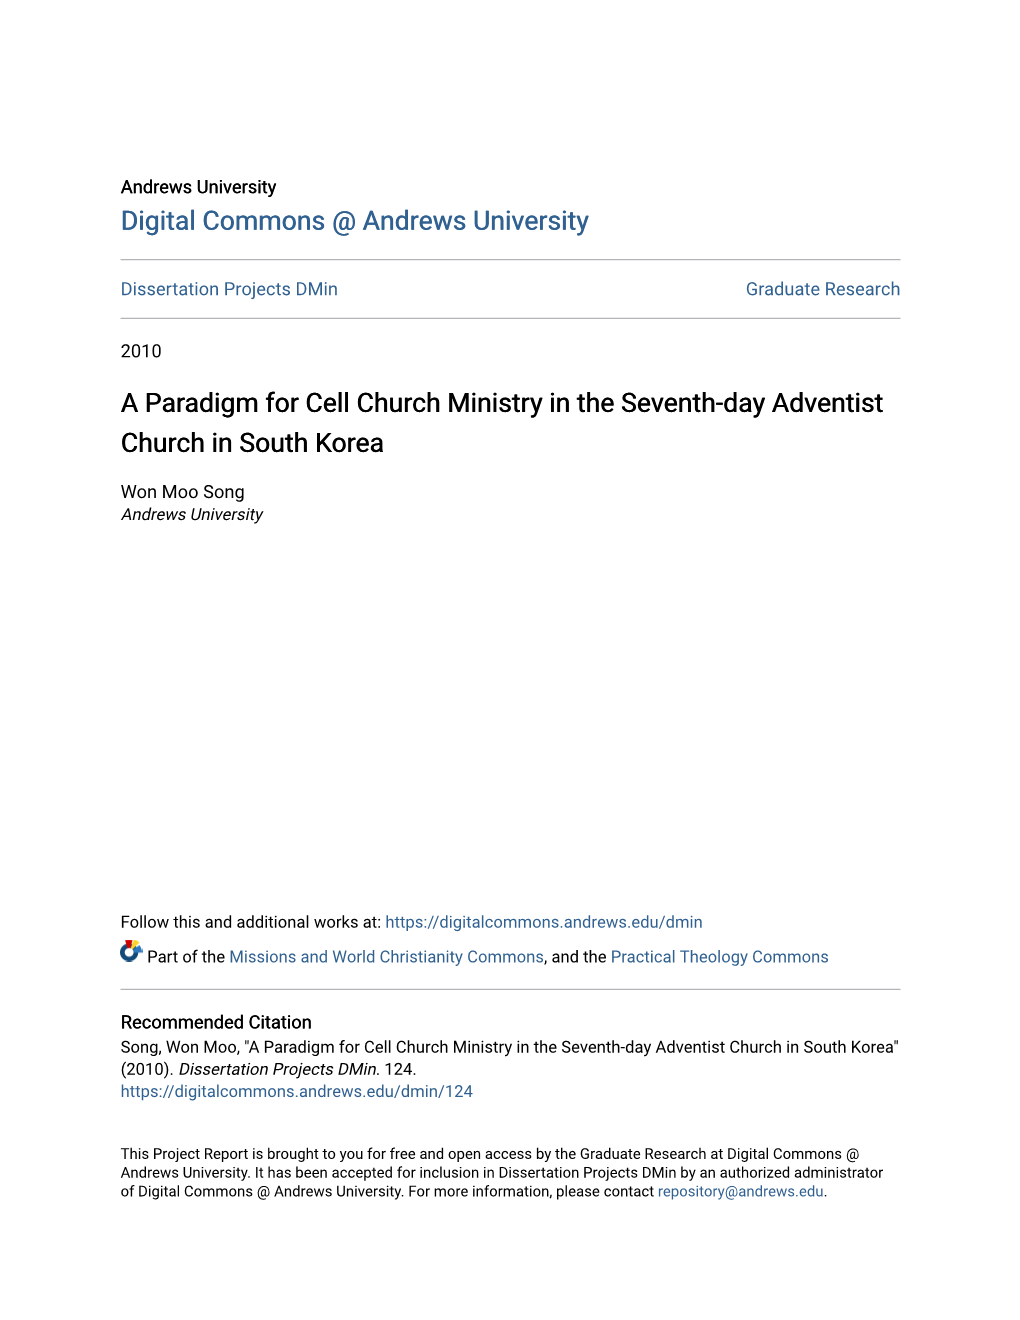 A Paradigm for Cell Church Ministry in the Seventh-Day Adventist Church in South Korea